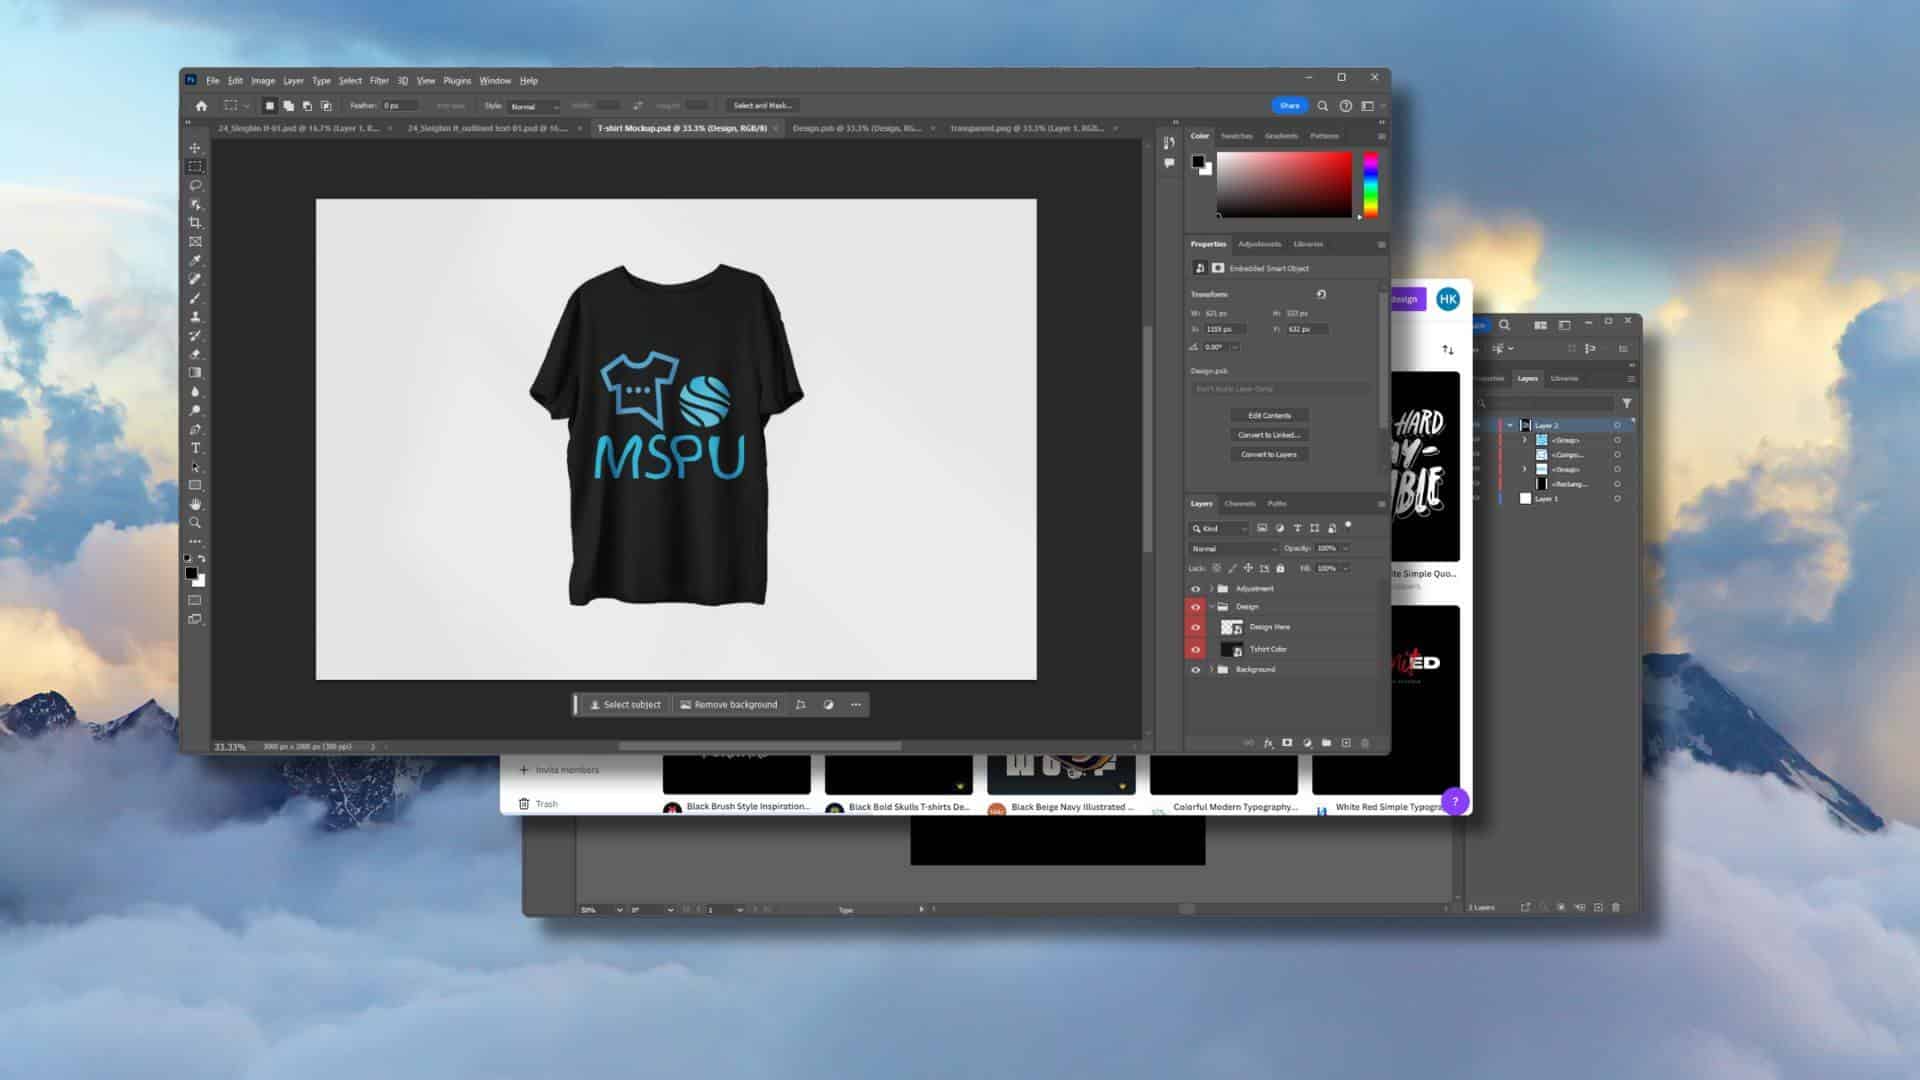 t-shirt design software for PC